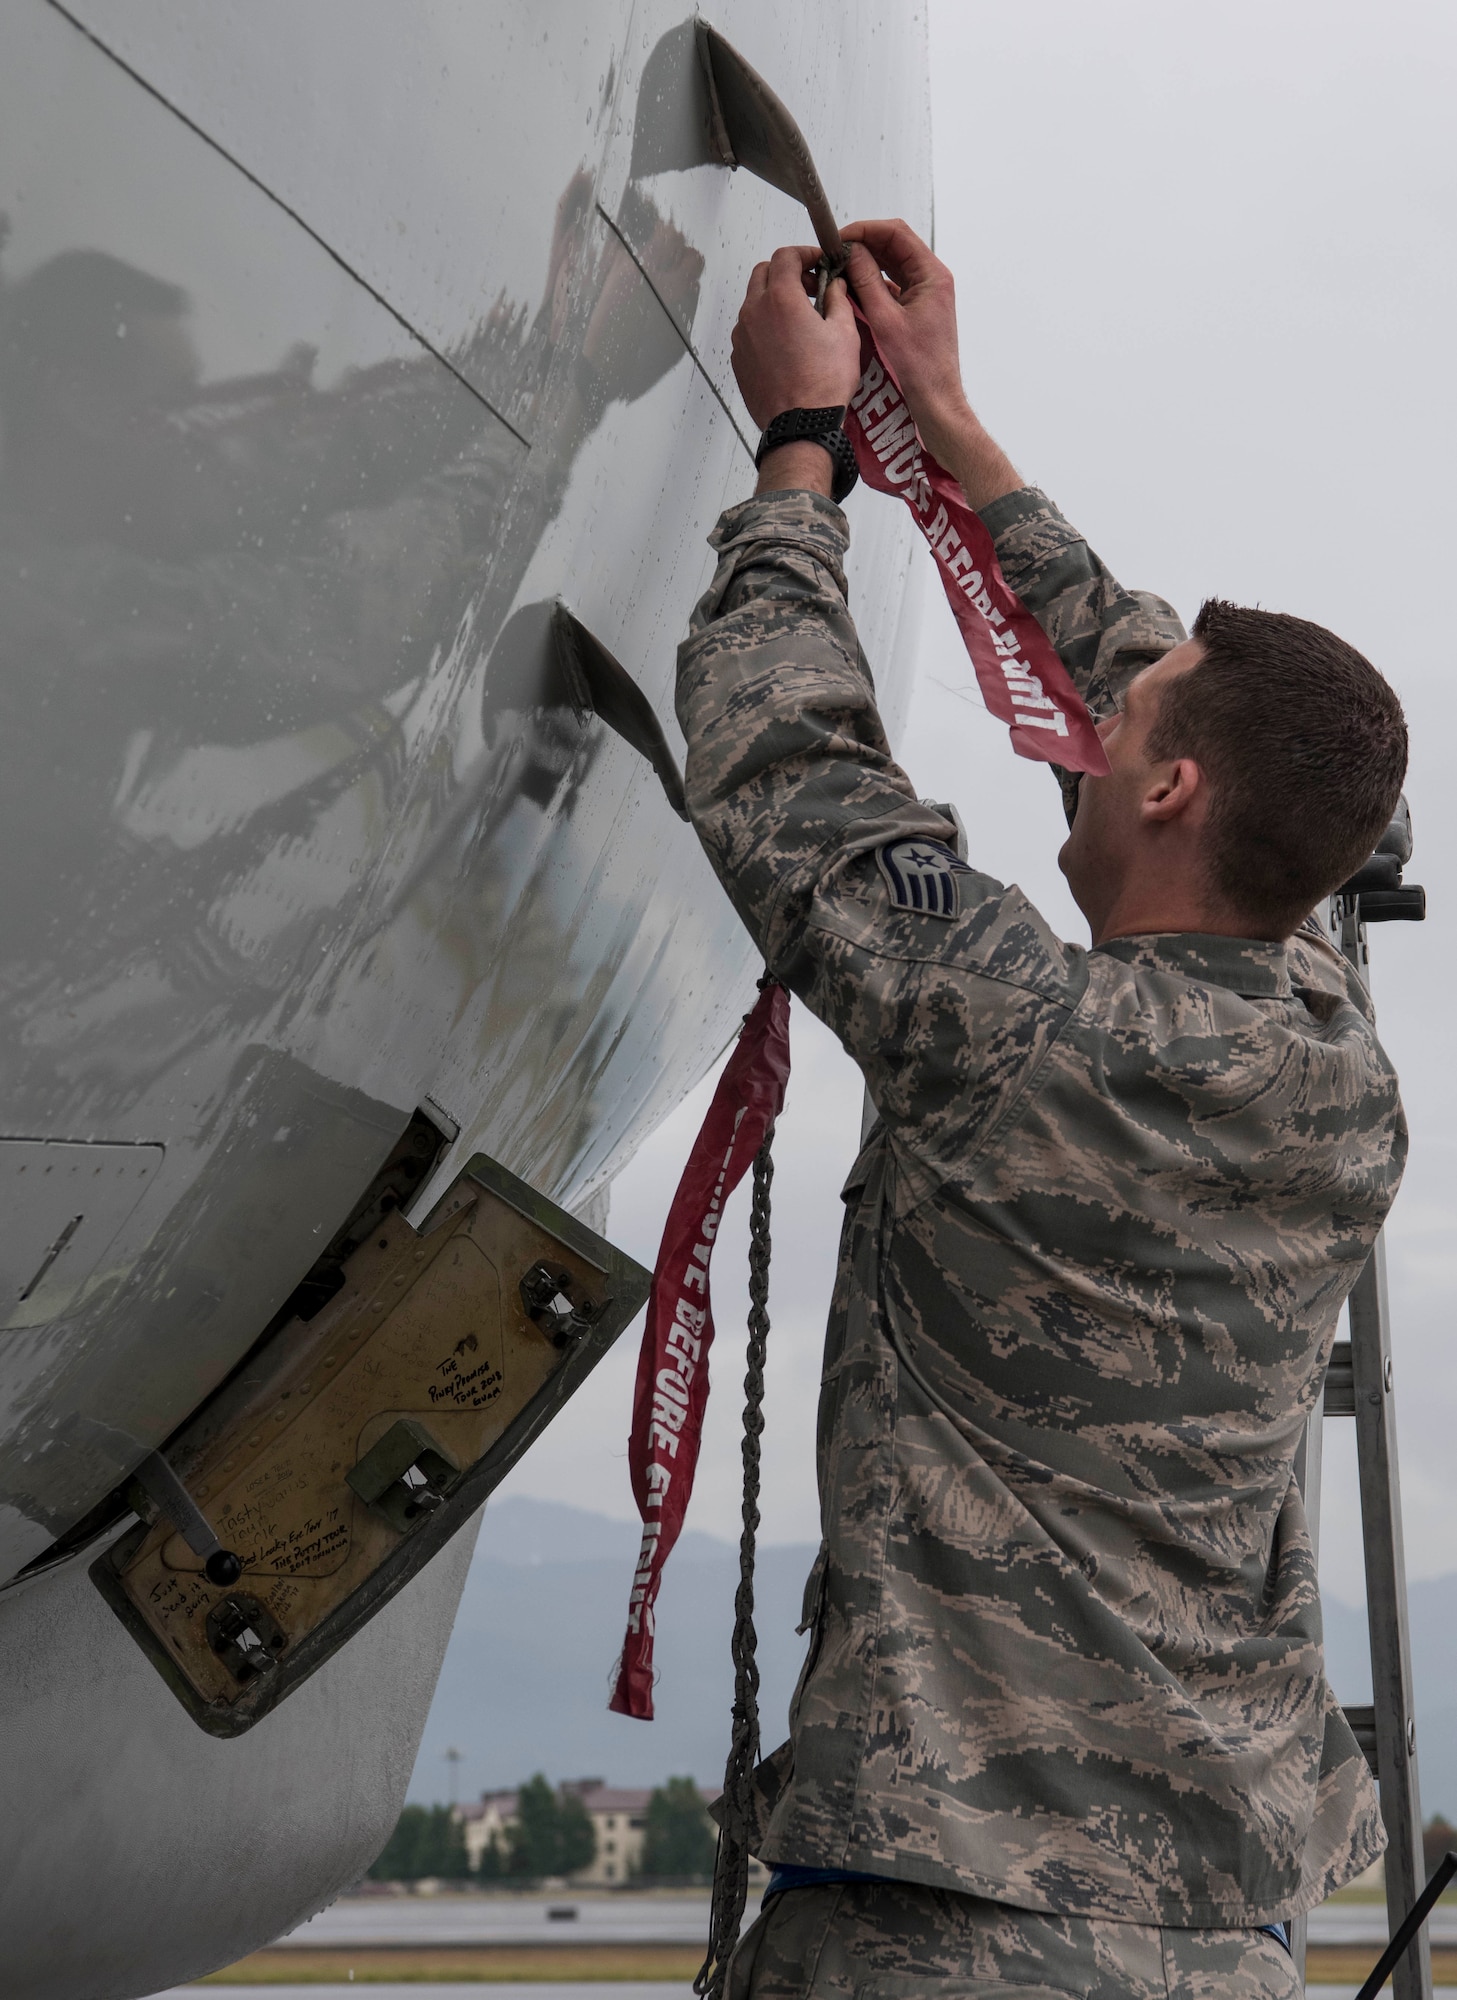 U.S. Air Force Staff Sgt. Matthew Kennedy, a 962nd Aircraft Maintenance Unit E-3 Sentry crew chief, places covers over external sensors at Joint Base Elmendorf-Richardson, Alaska, July 25, 2018. Kennedy is responsible for service and repair on everything coming back from daily inspections, to include things like oil, hydraulics, fueling the jet and ensuring covers are in place.